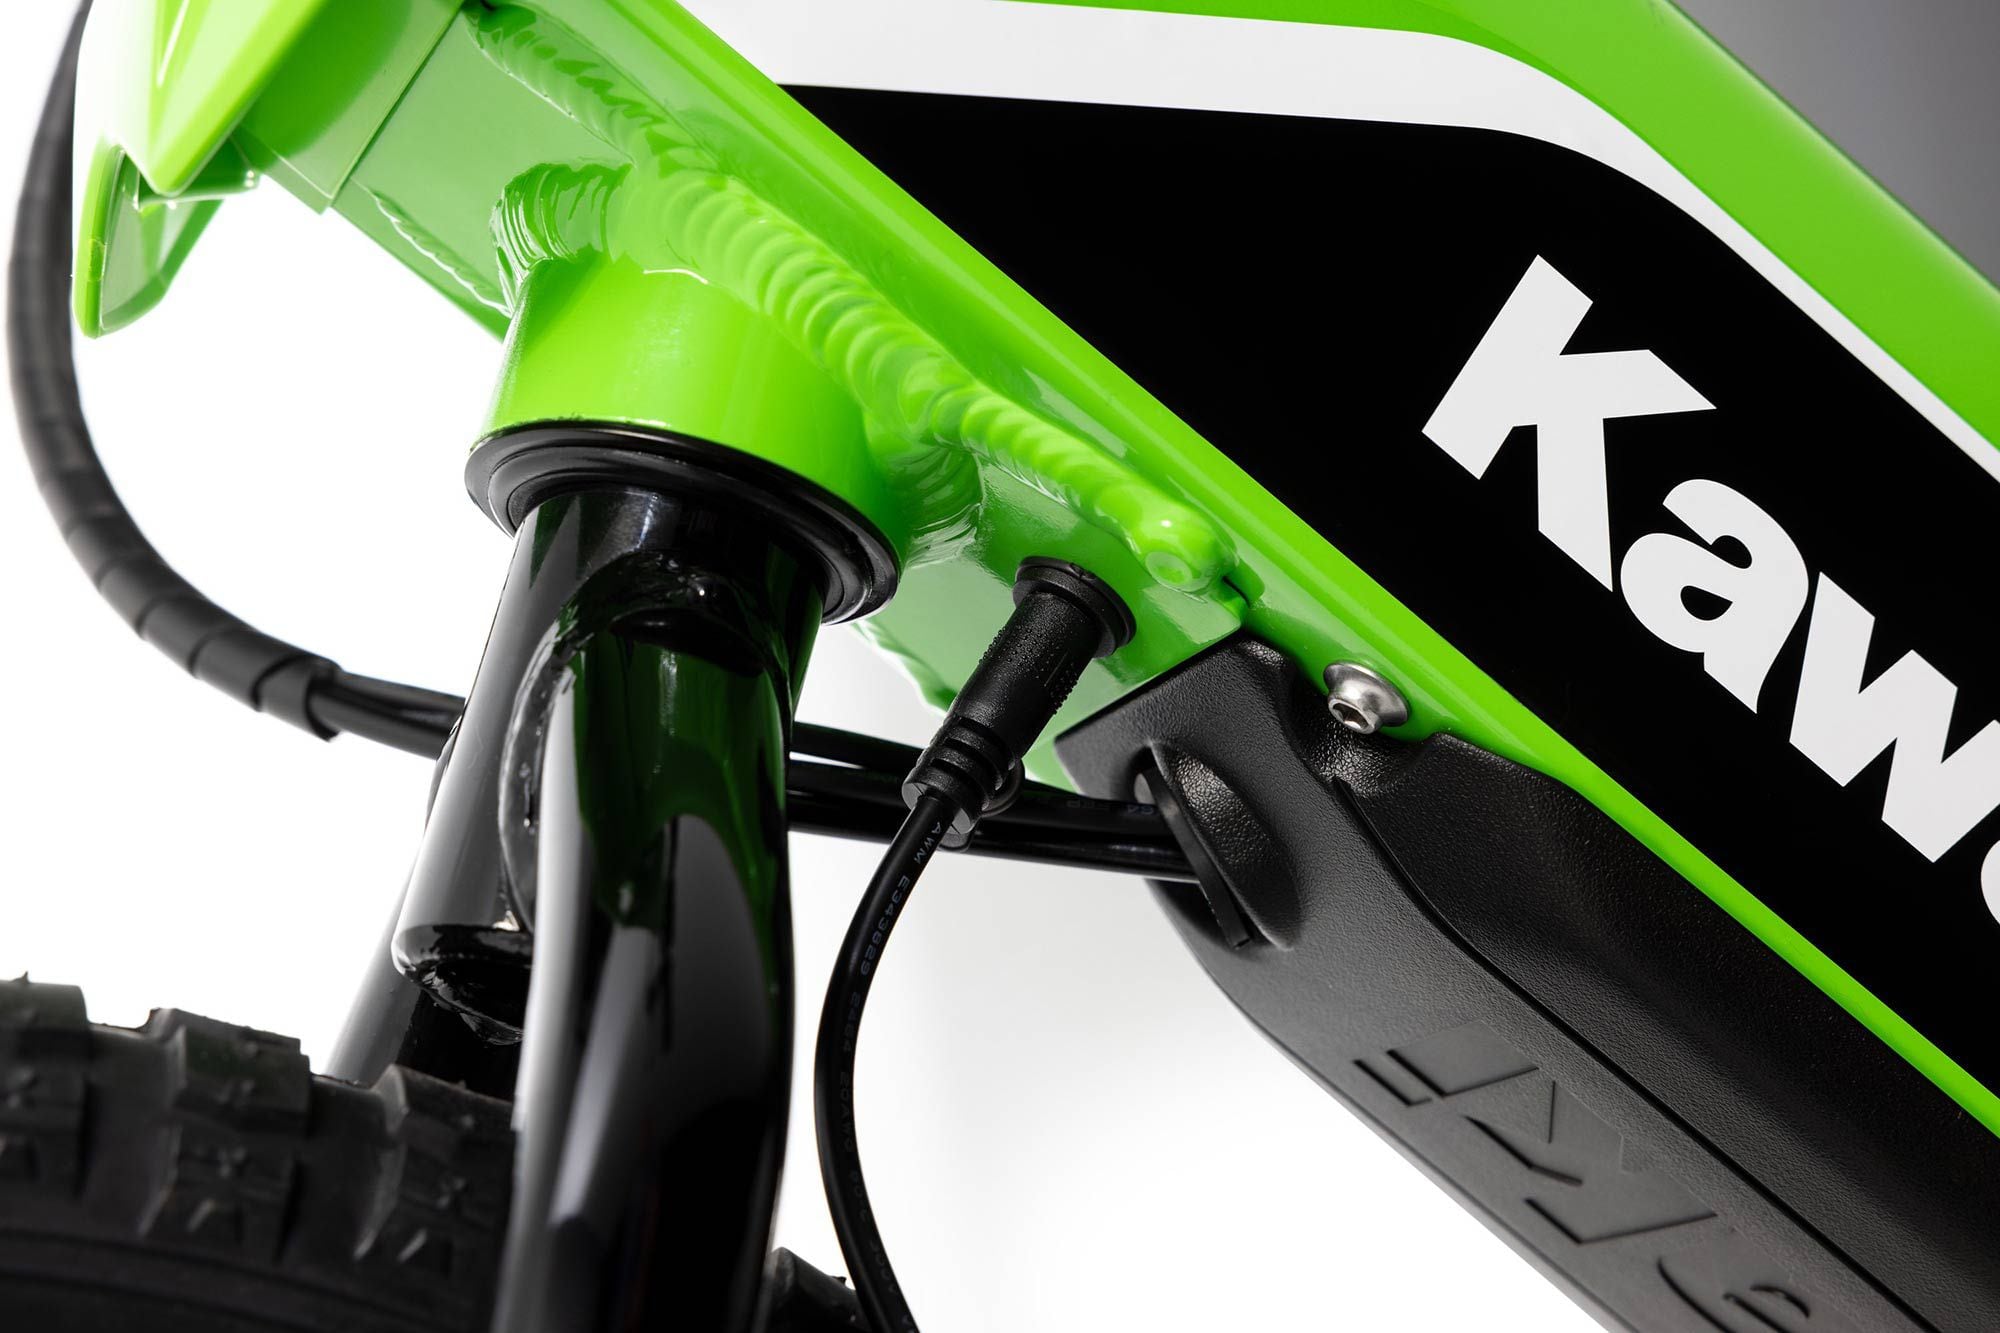 The charger plugs into the front of the bike and can be connected to a 110-volt outlet.